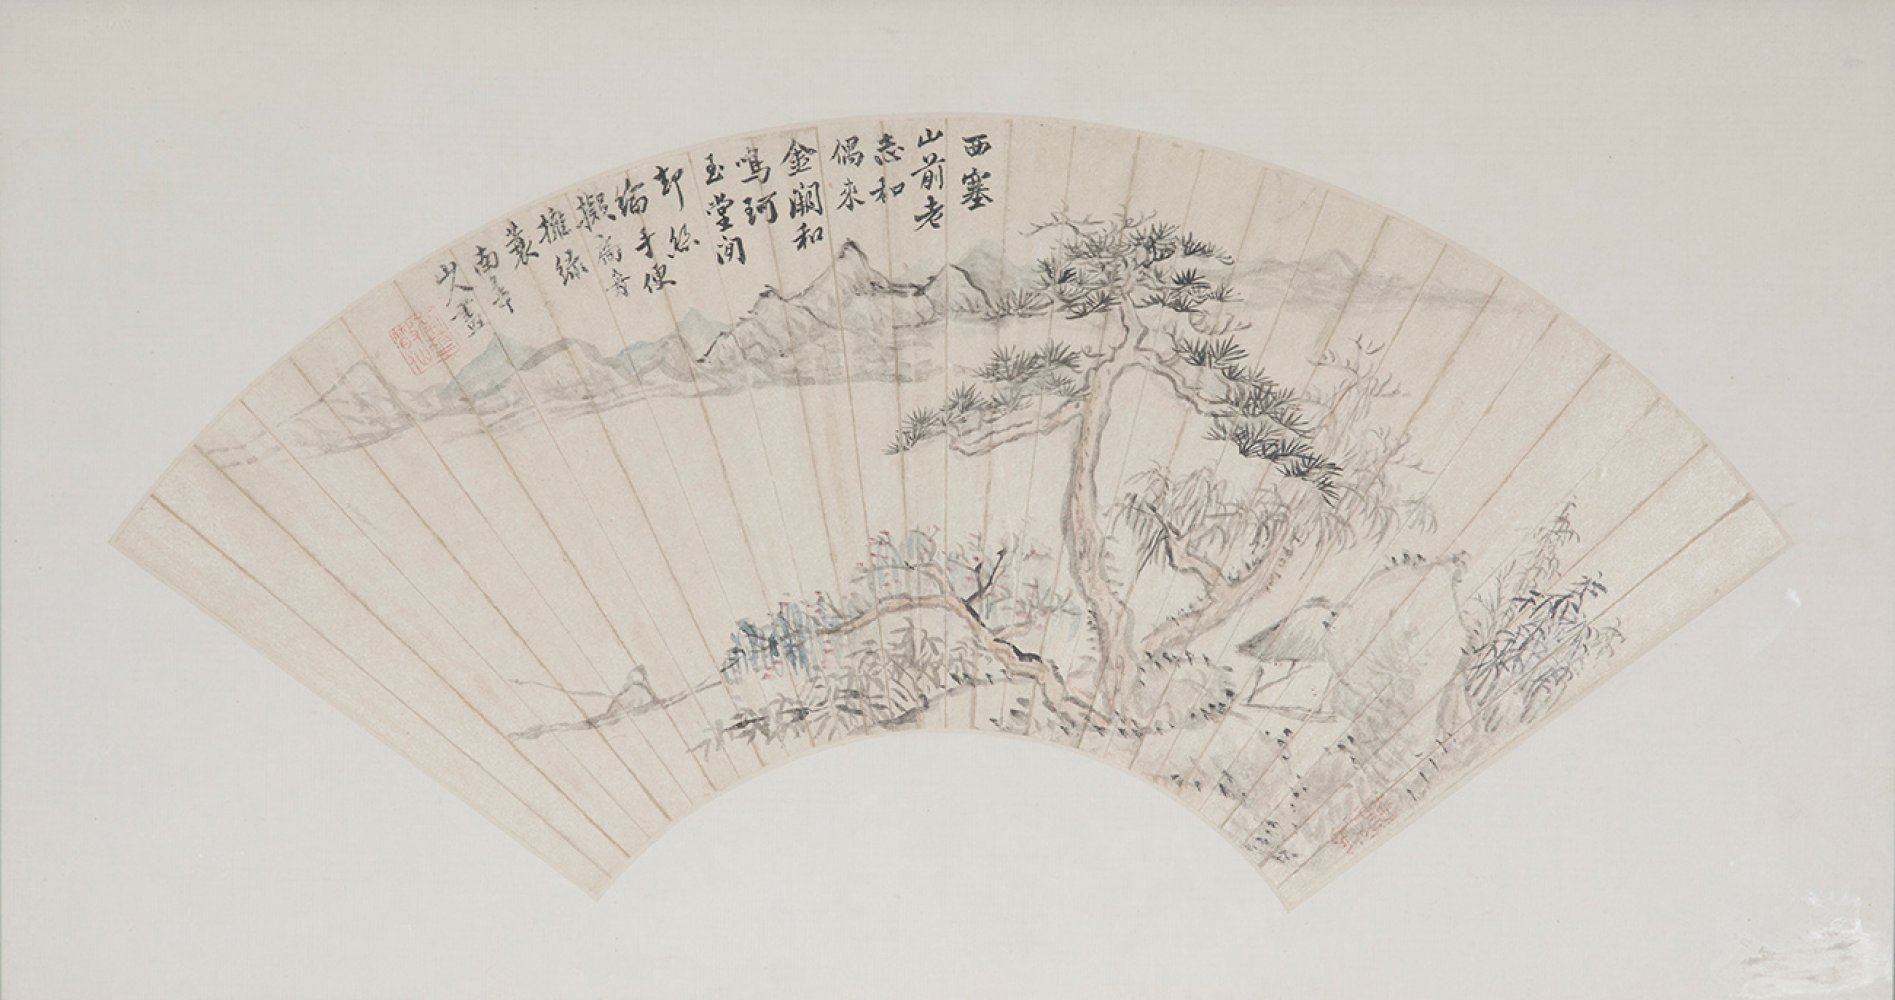 ZHANG PENGCHONG (Juading, Jiangsu 1688-1745)."Landscape with tree and mountains".Fan leaf with ink